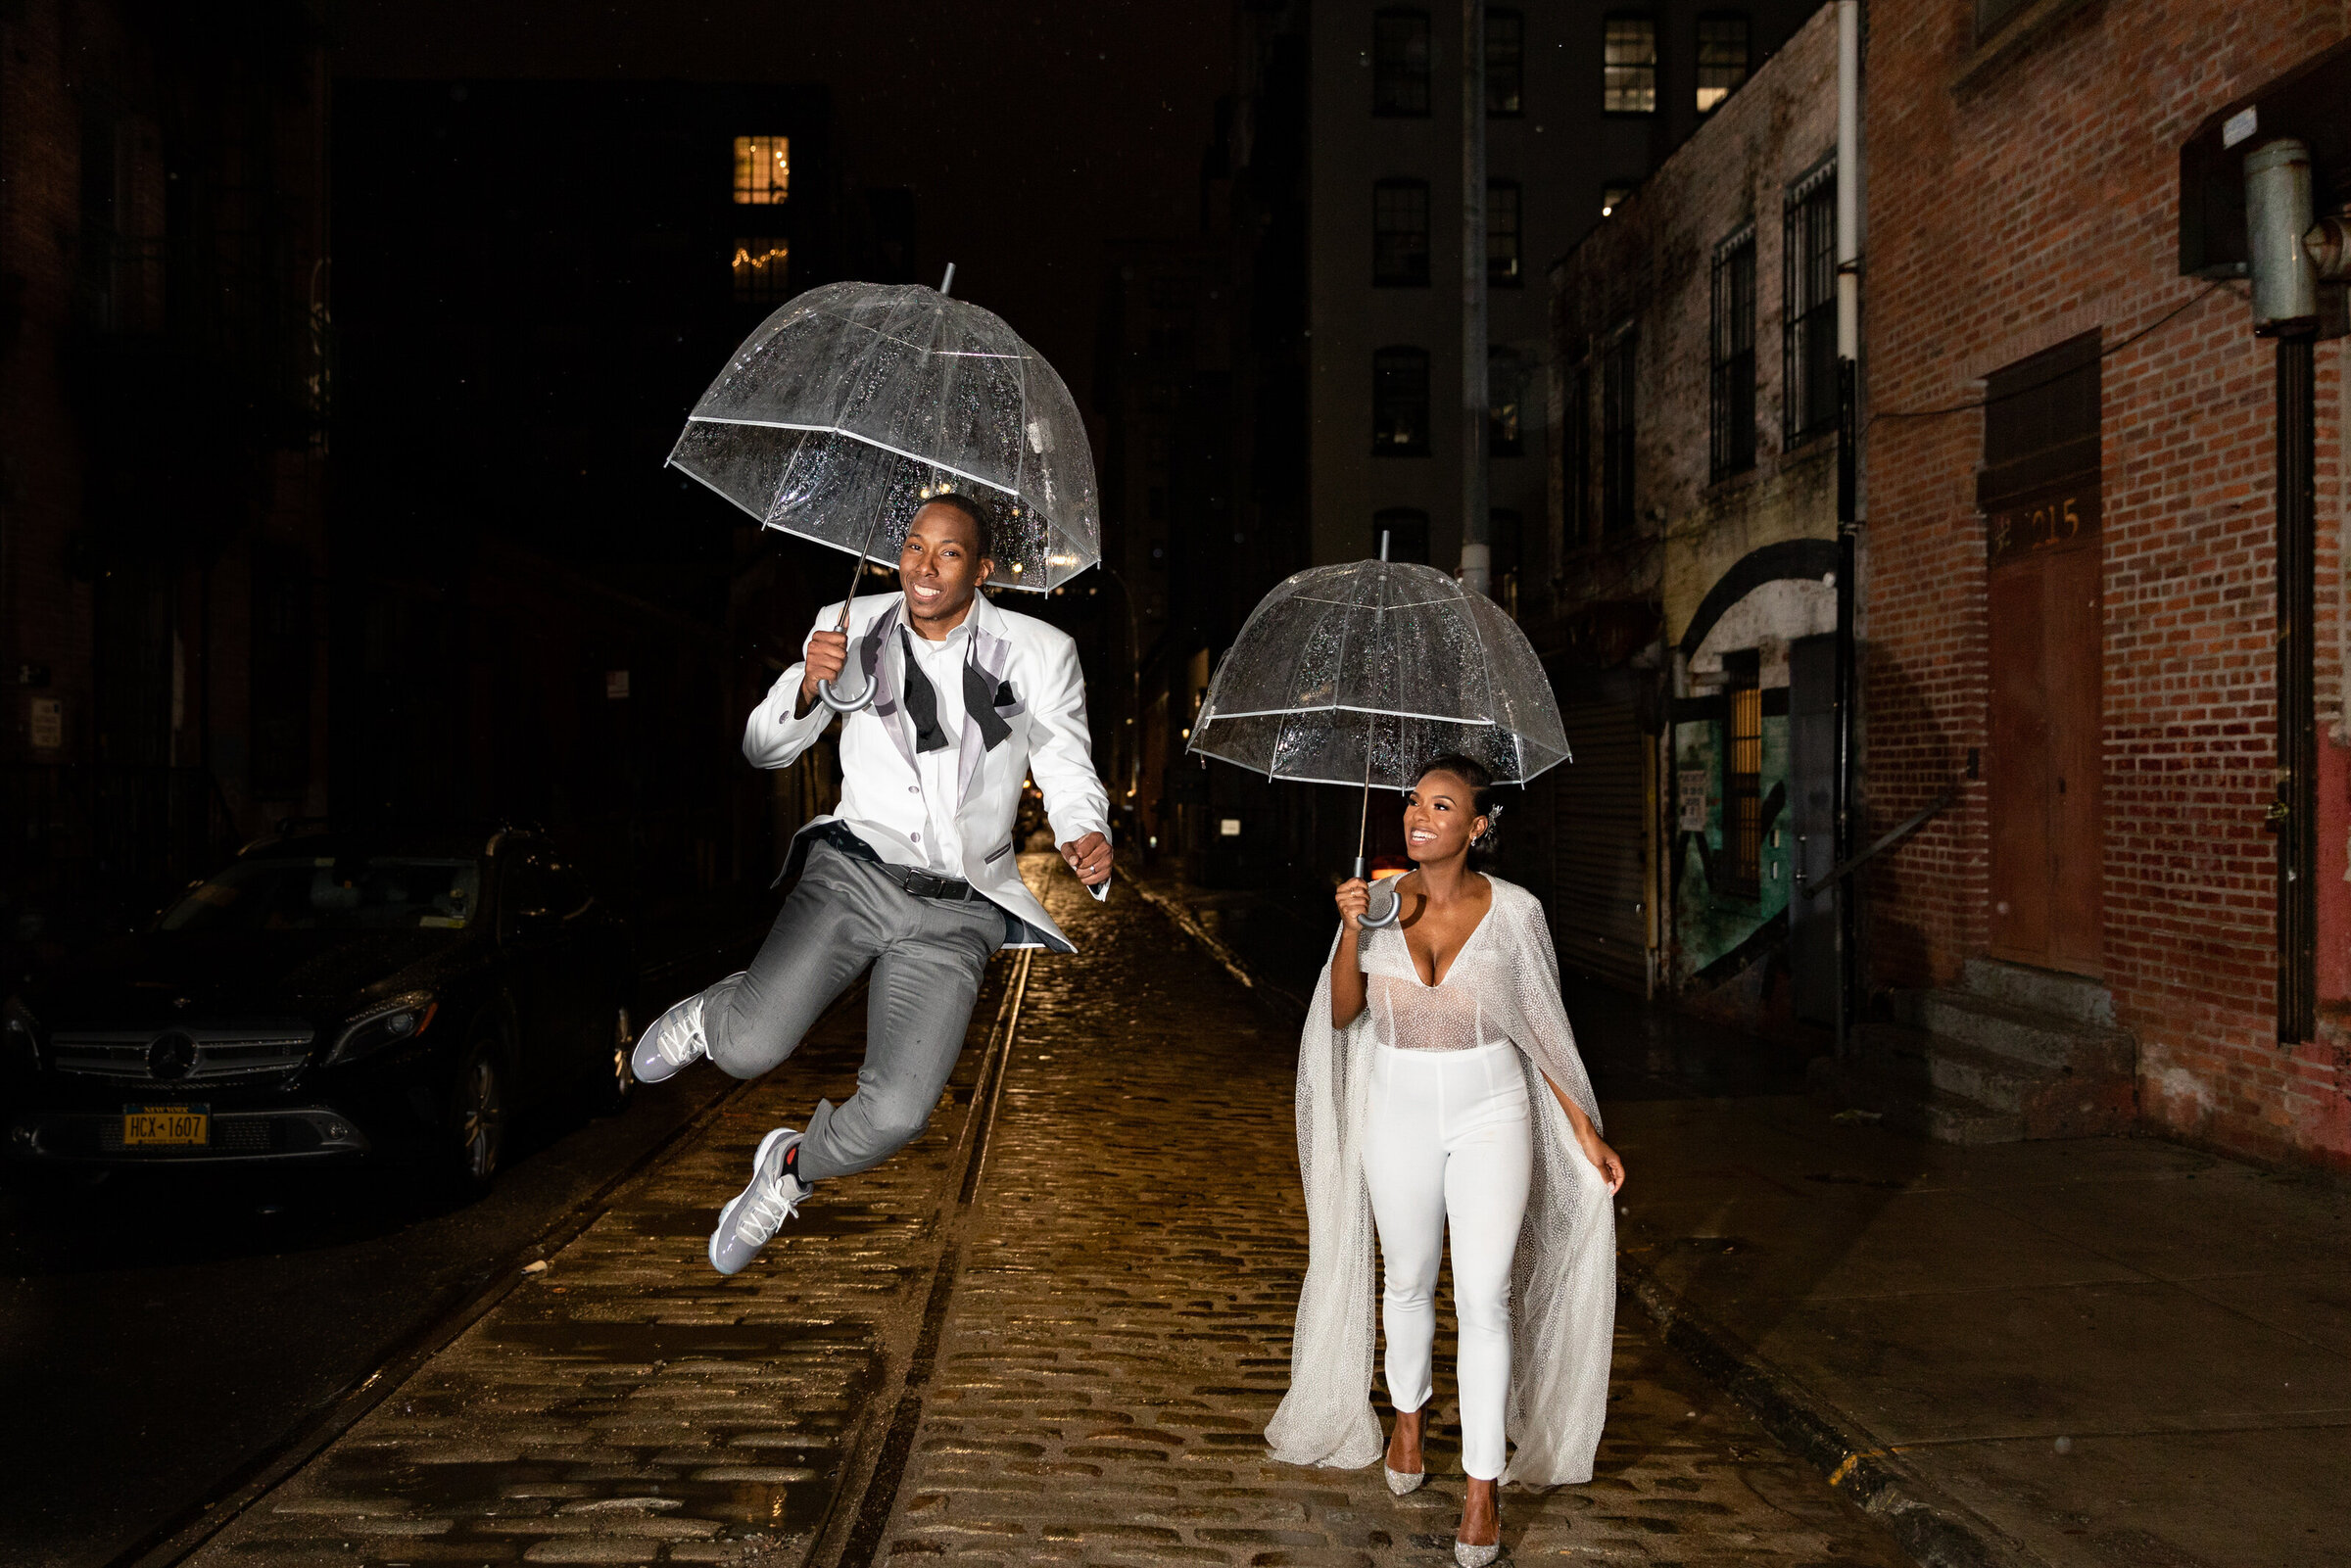 A couple walking along a sidewalk while holding umbrella while one of them jumps.